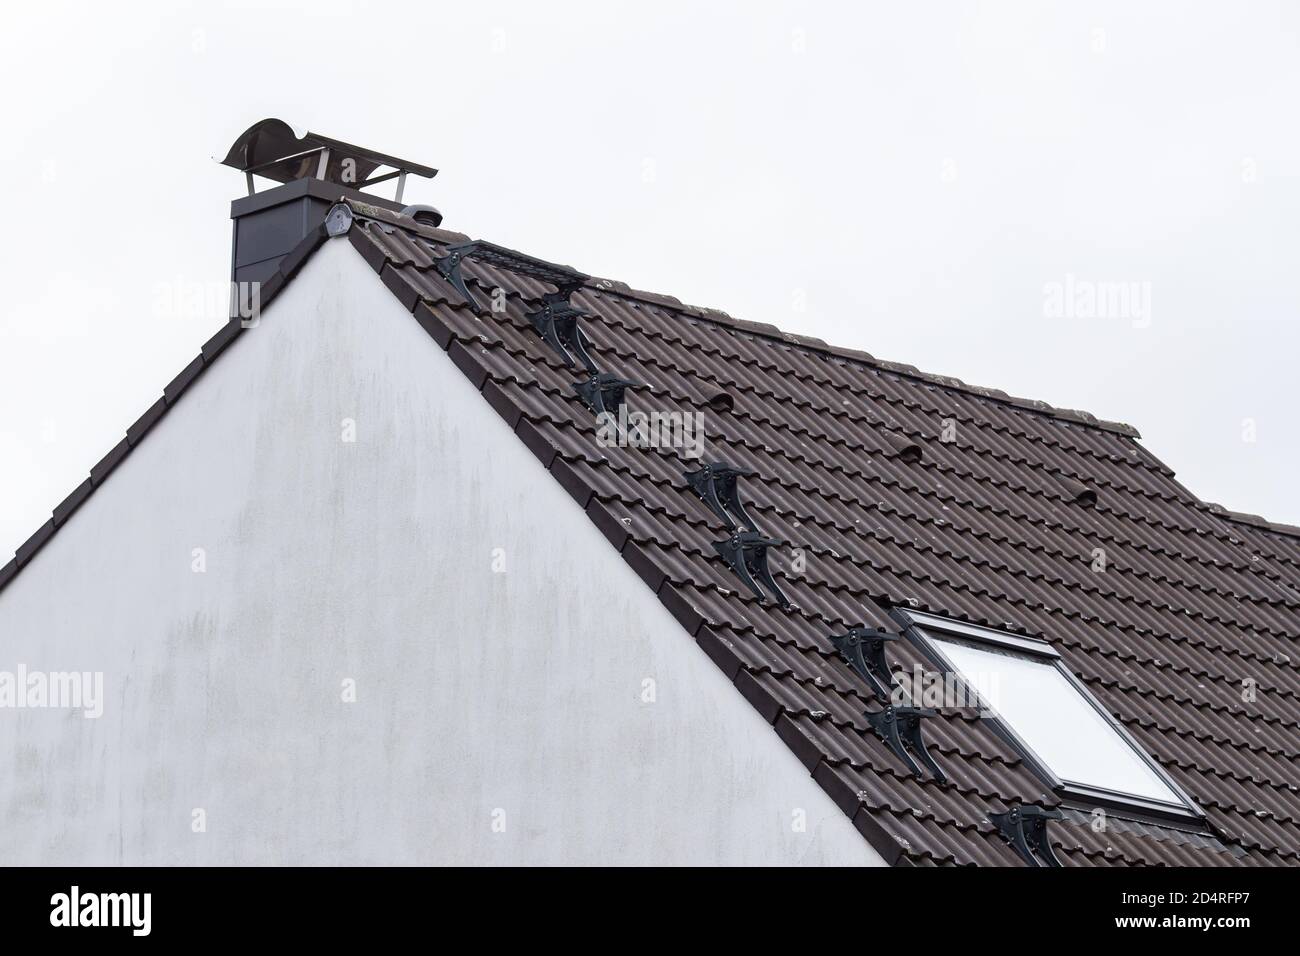 Closeup shot of a tiled roof of a modern house building Stock Photo